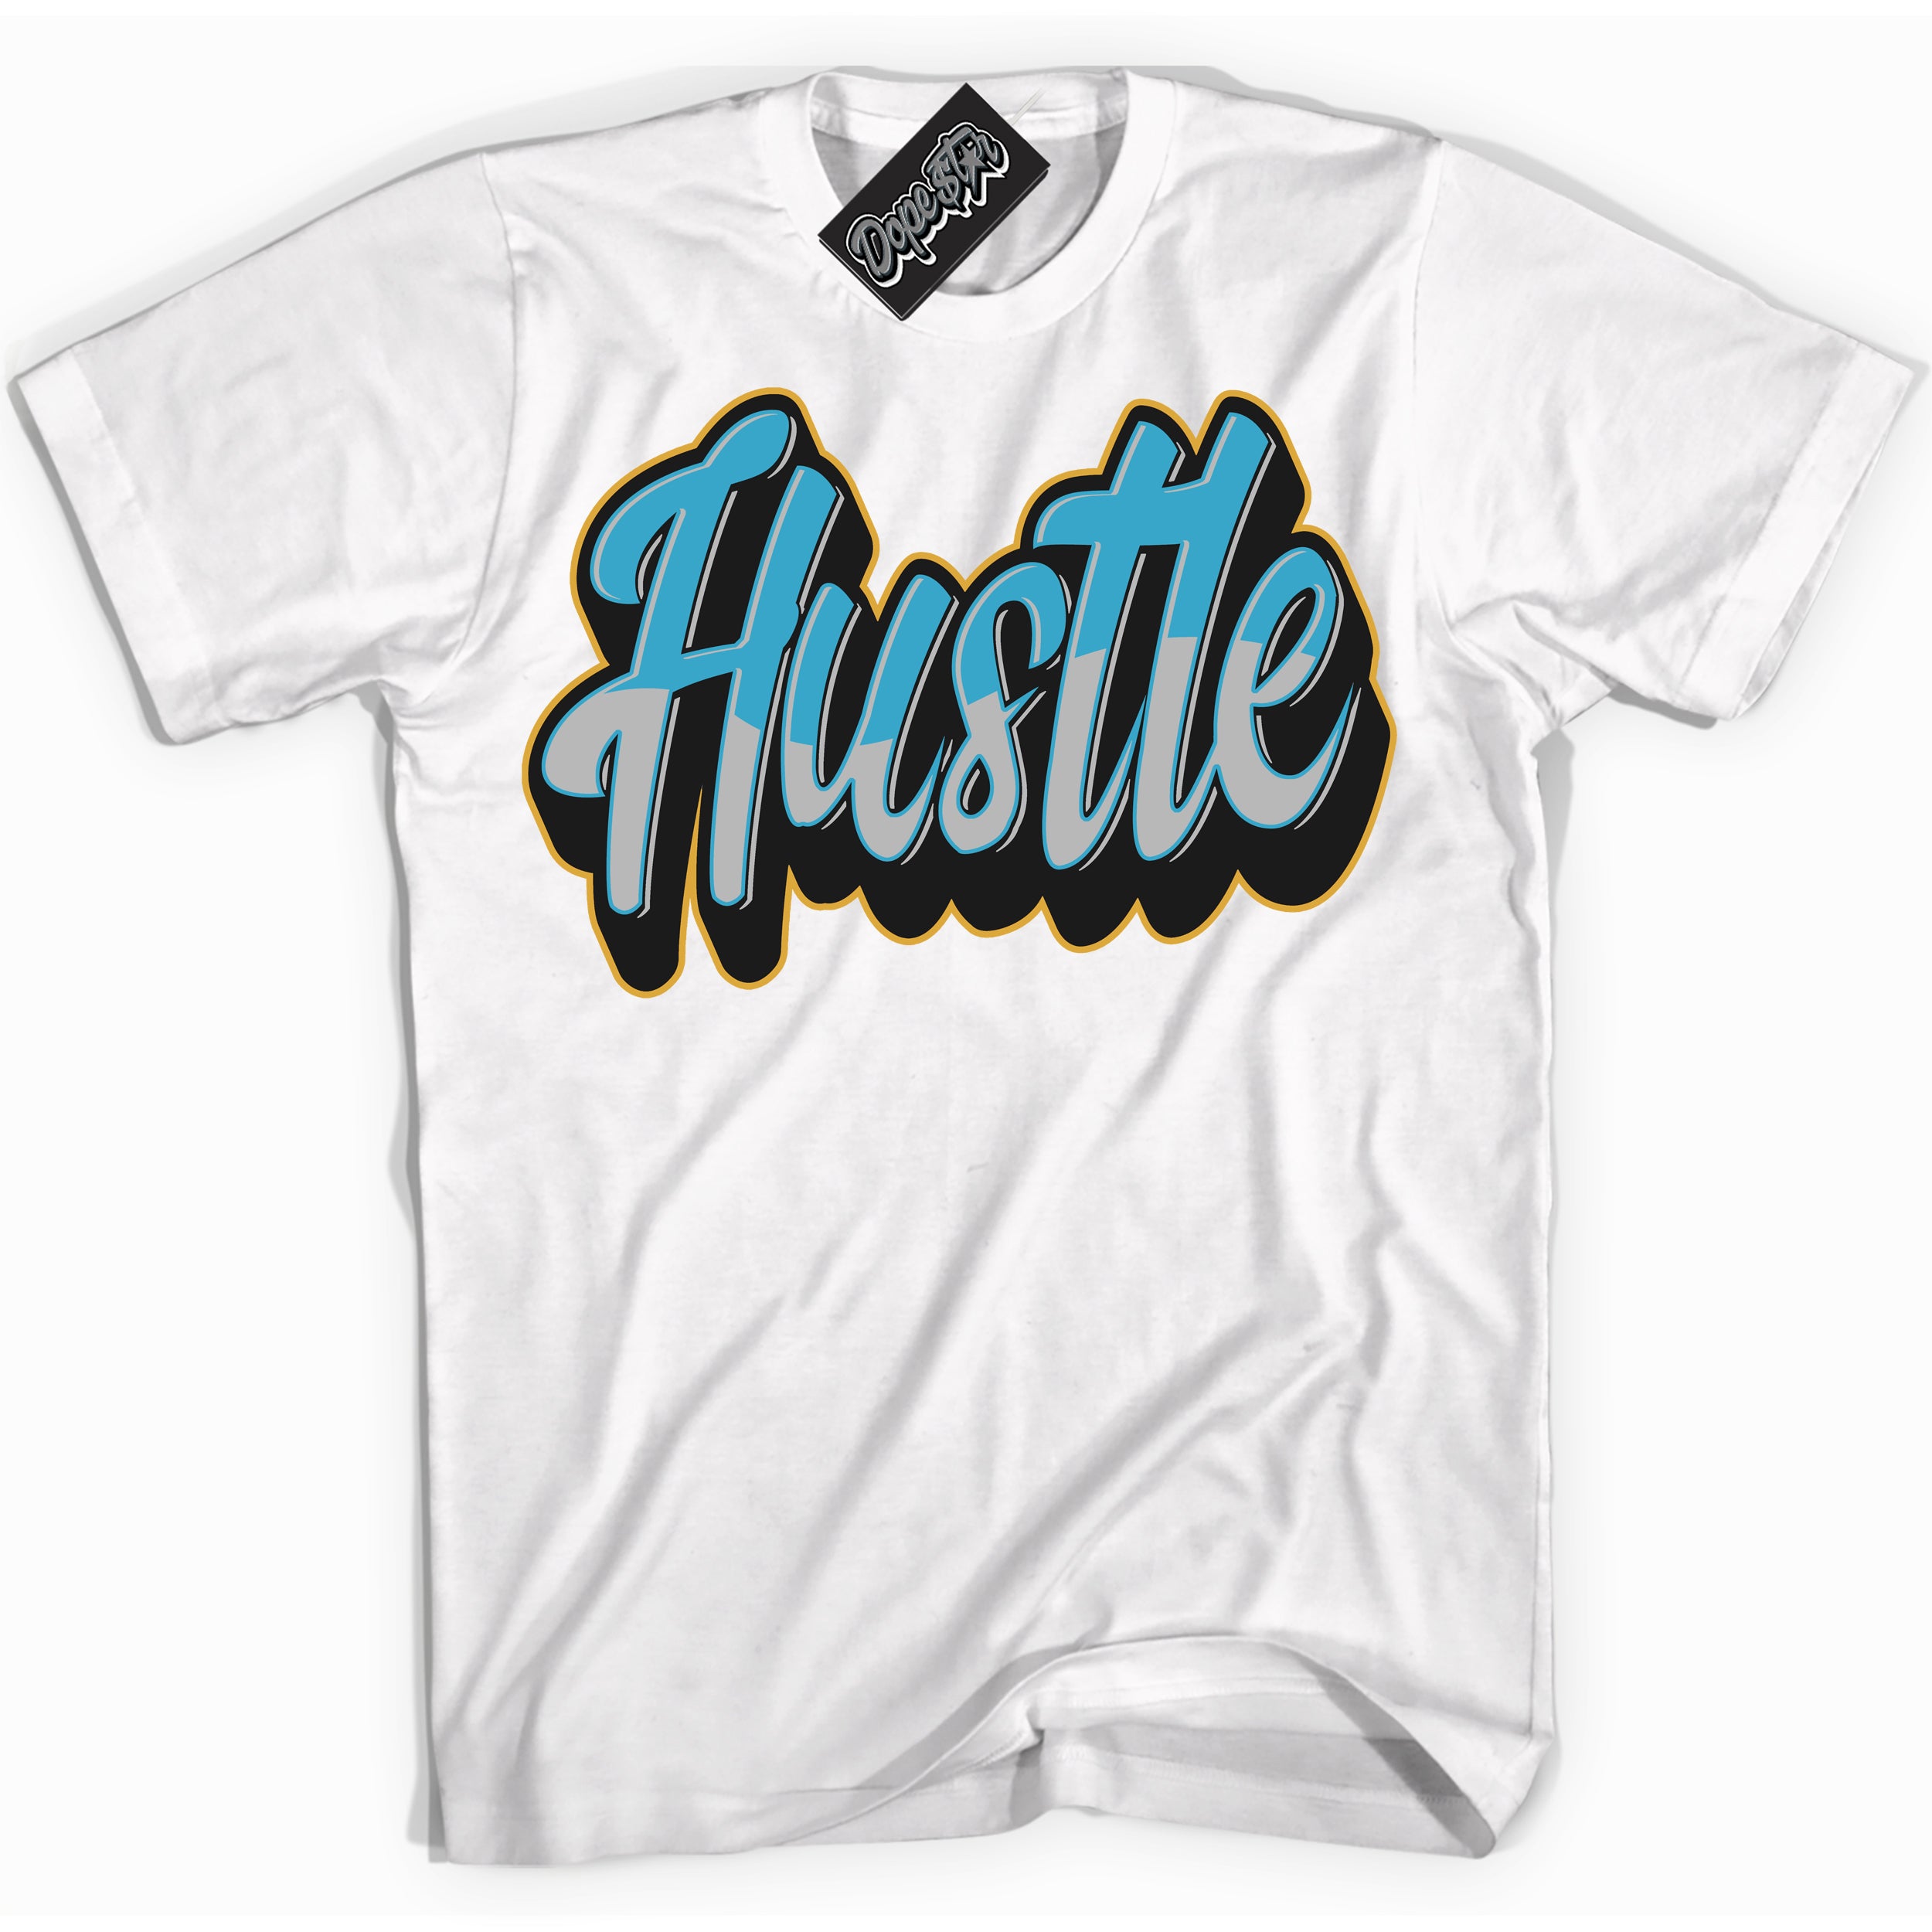 Cool White Shirt with “ Hustle” design that perfectly matches Aqua 5s Sneakers.